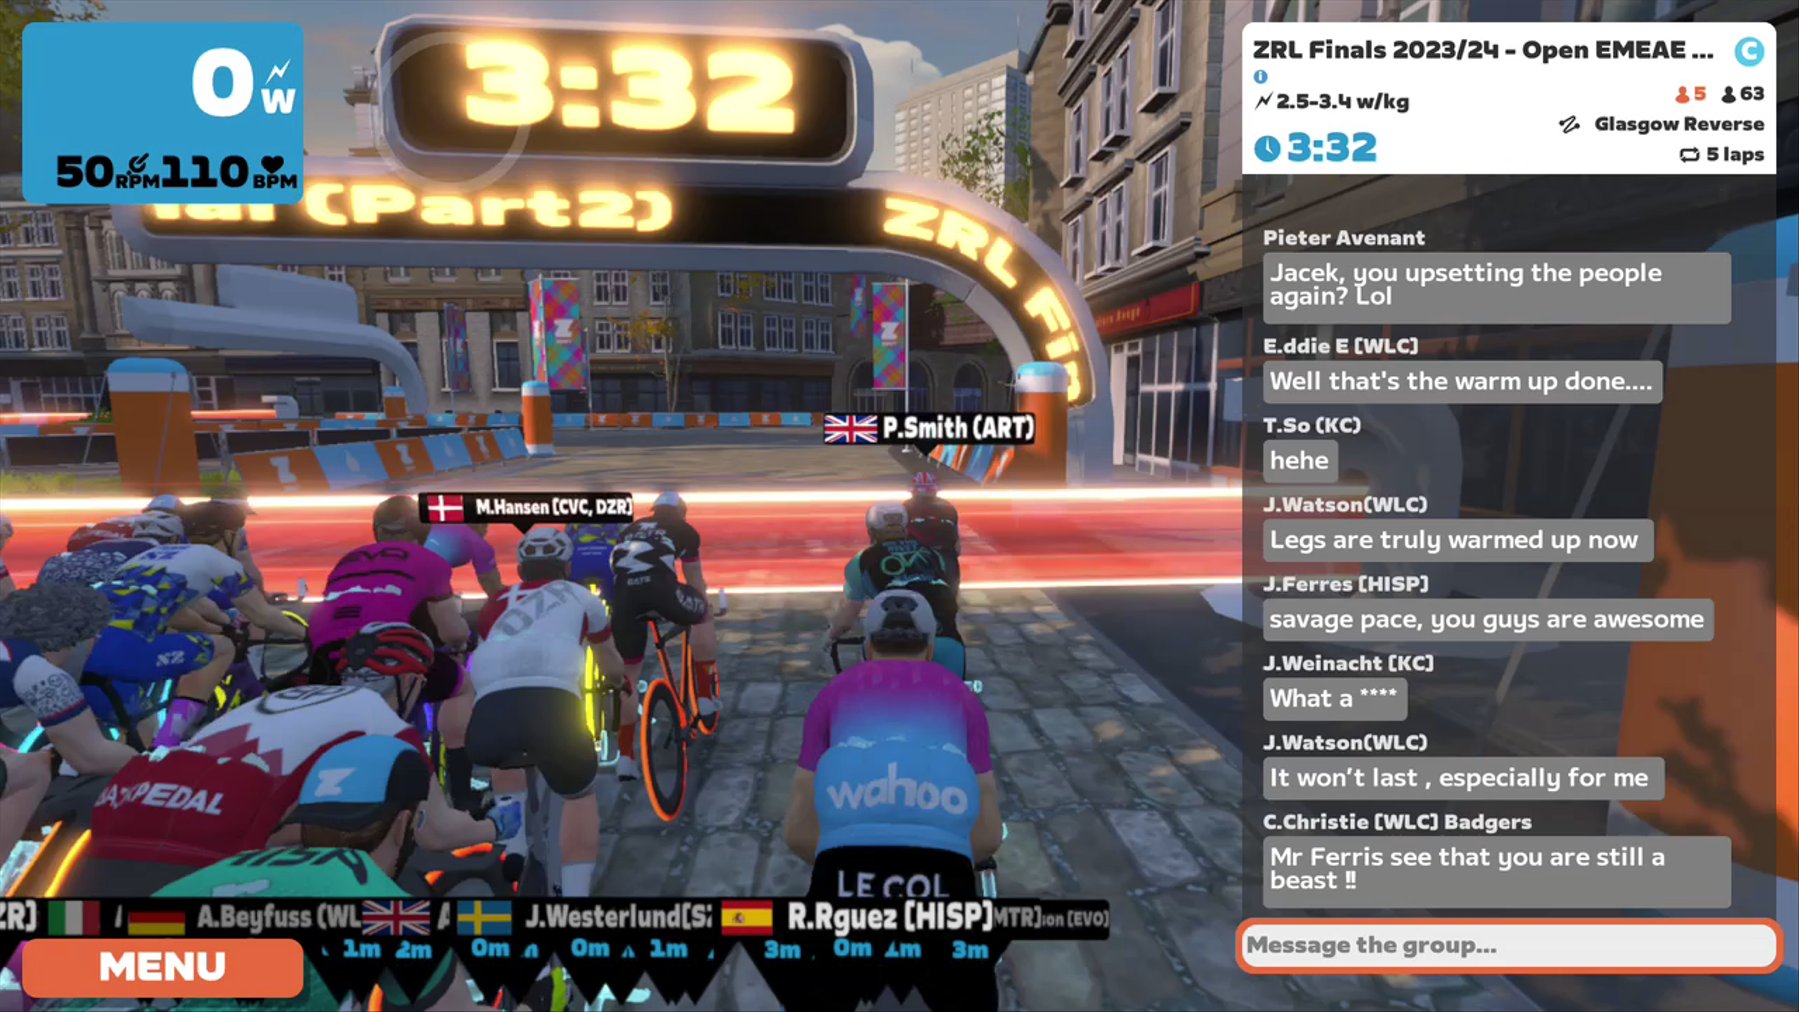 Zwift - Race: ZRL Finals 2023/24 - Open EMEAE Division 1 - Cup Final (Part2) (C) on Glasgow Reverse in Scotland